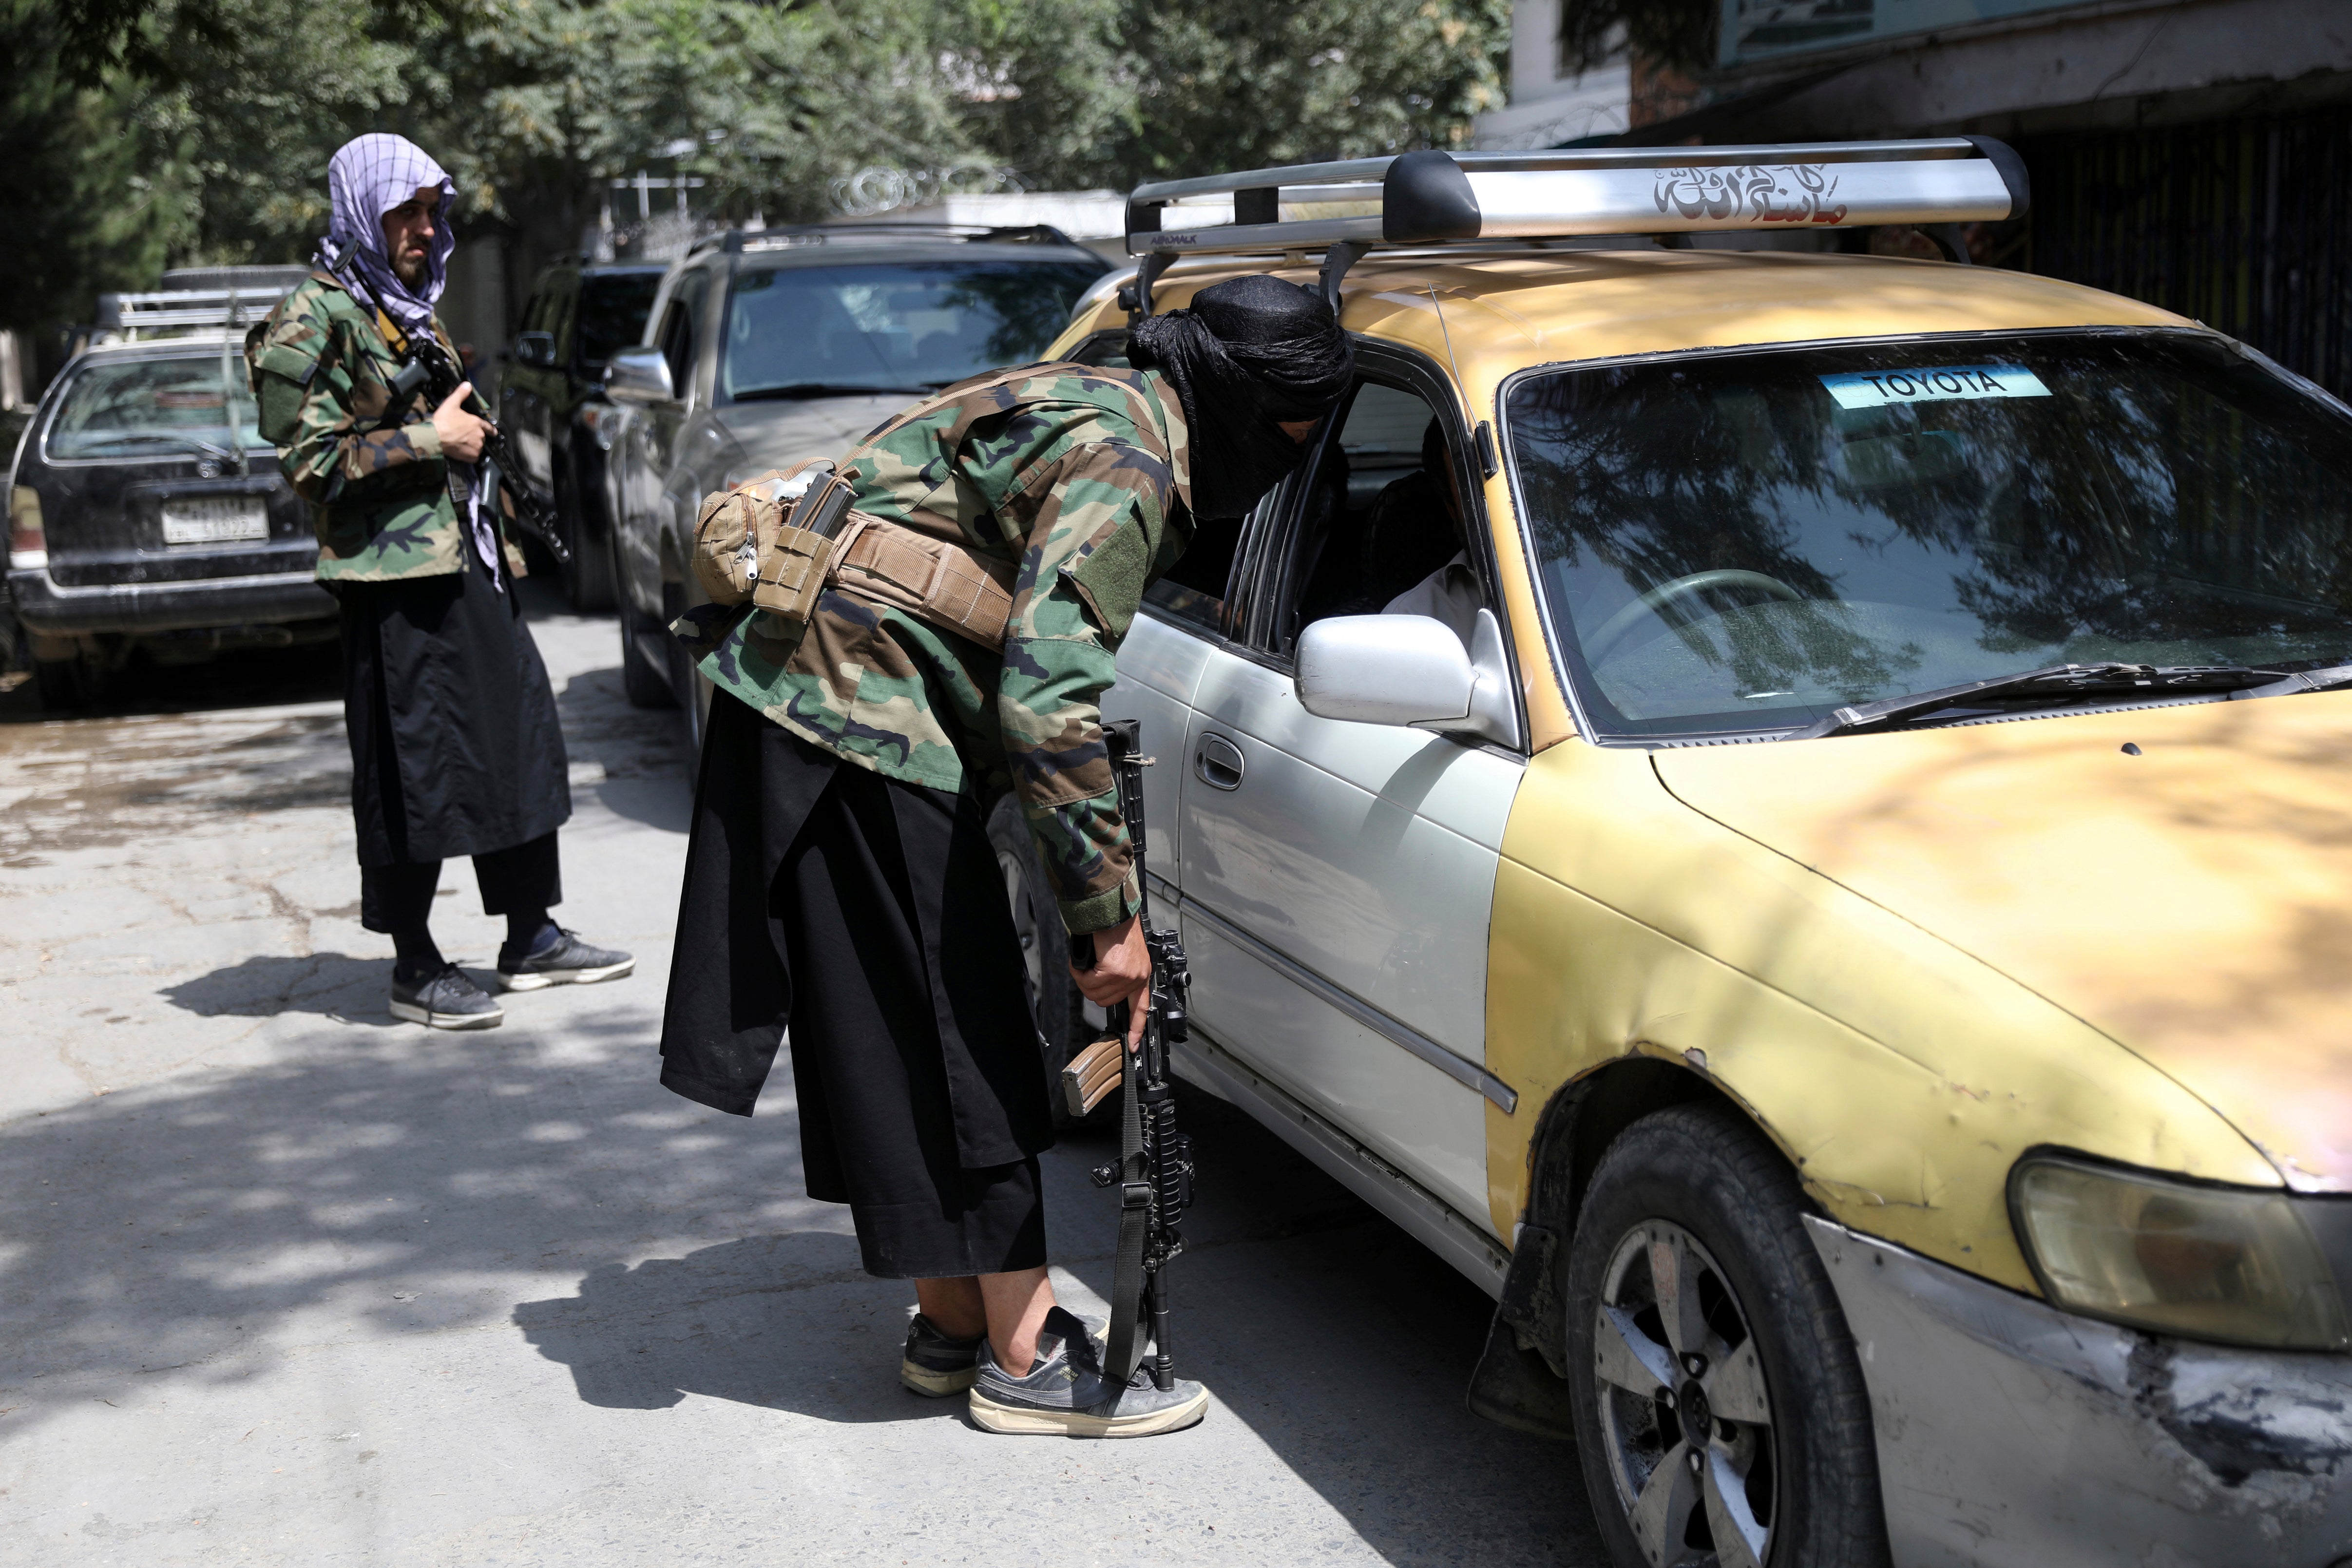 In this 22 August 2021 file photo, Taliban fighters search a vehicle at a checkpoint on the road in the Wazir Akbar Khan neighbourhood in the city of Kabul, Afghanistan